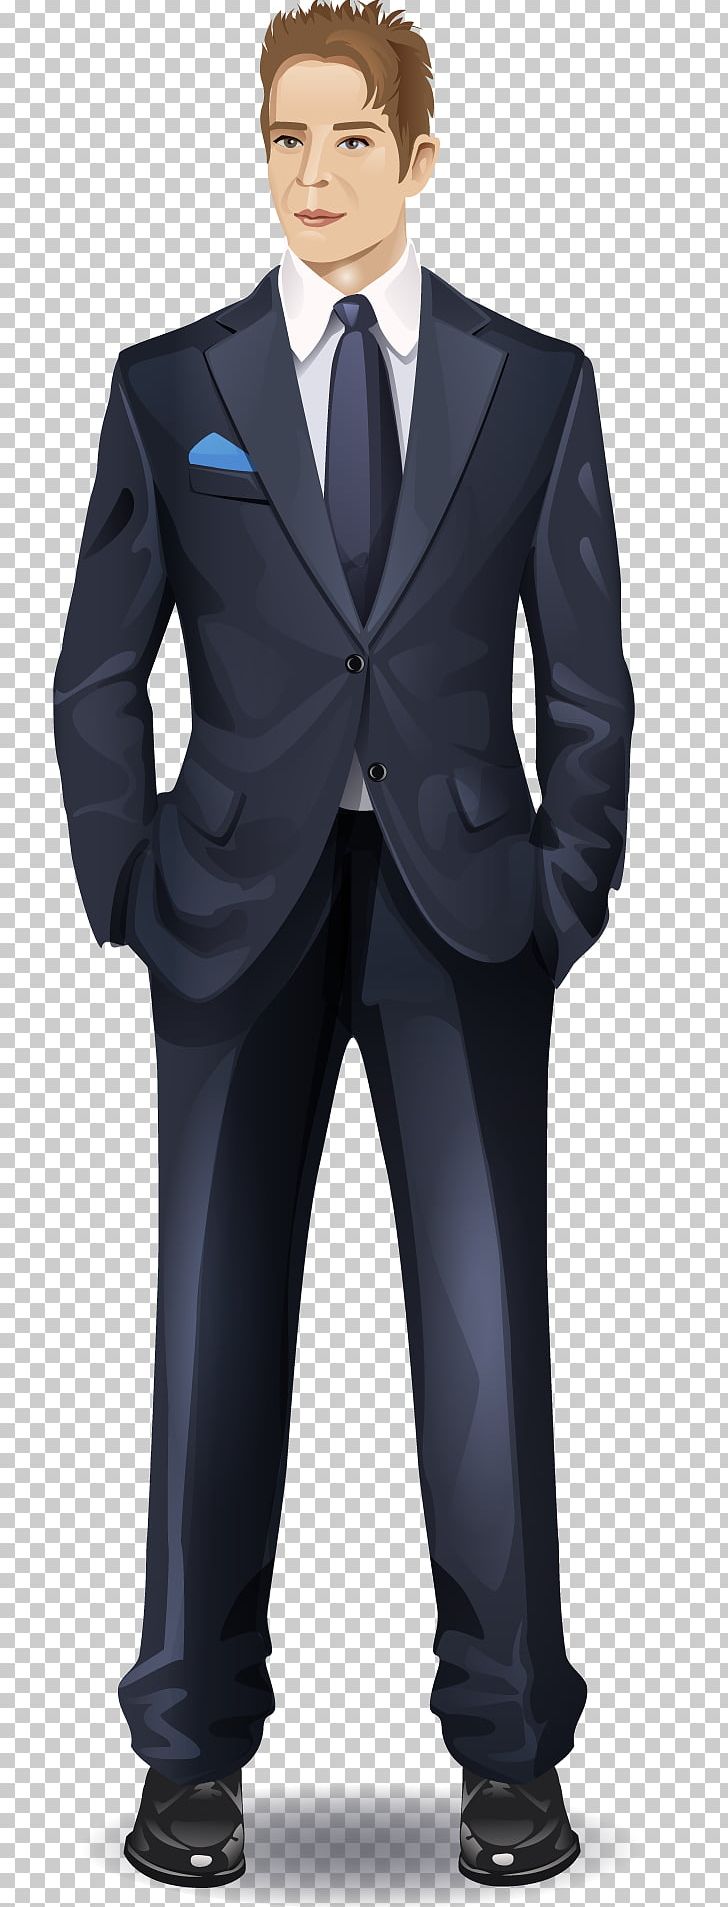 Tuxedo Suit PNG, Clipart, Business, Business Man, Businessperson, Formal Wear, Happy Birthday Vector Images Free PNG Download